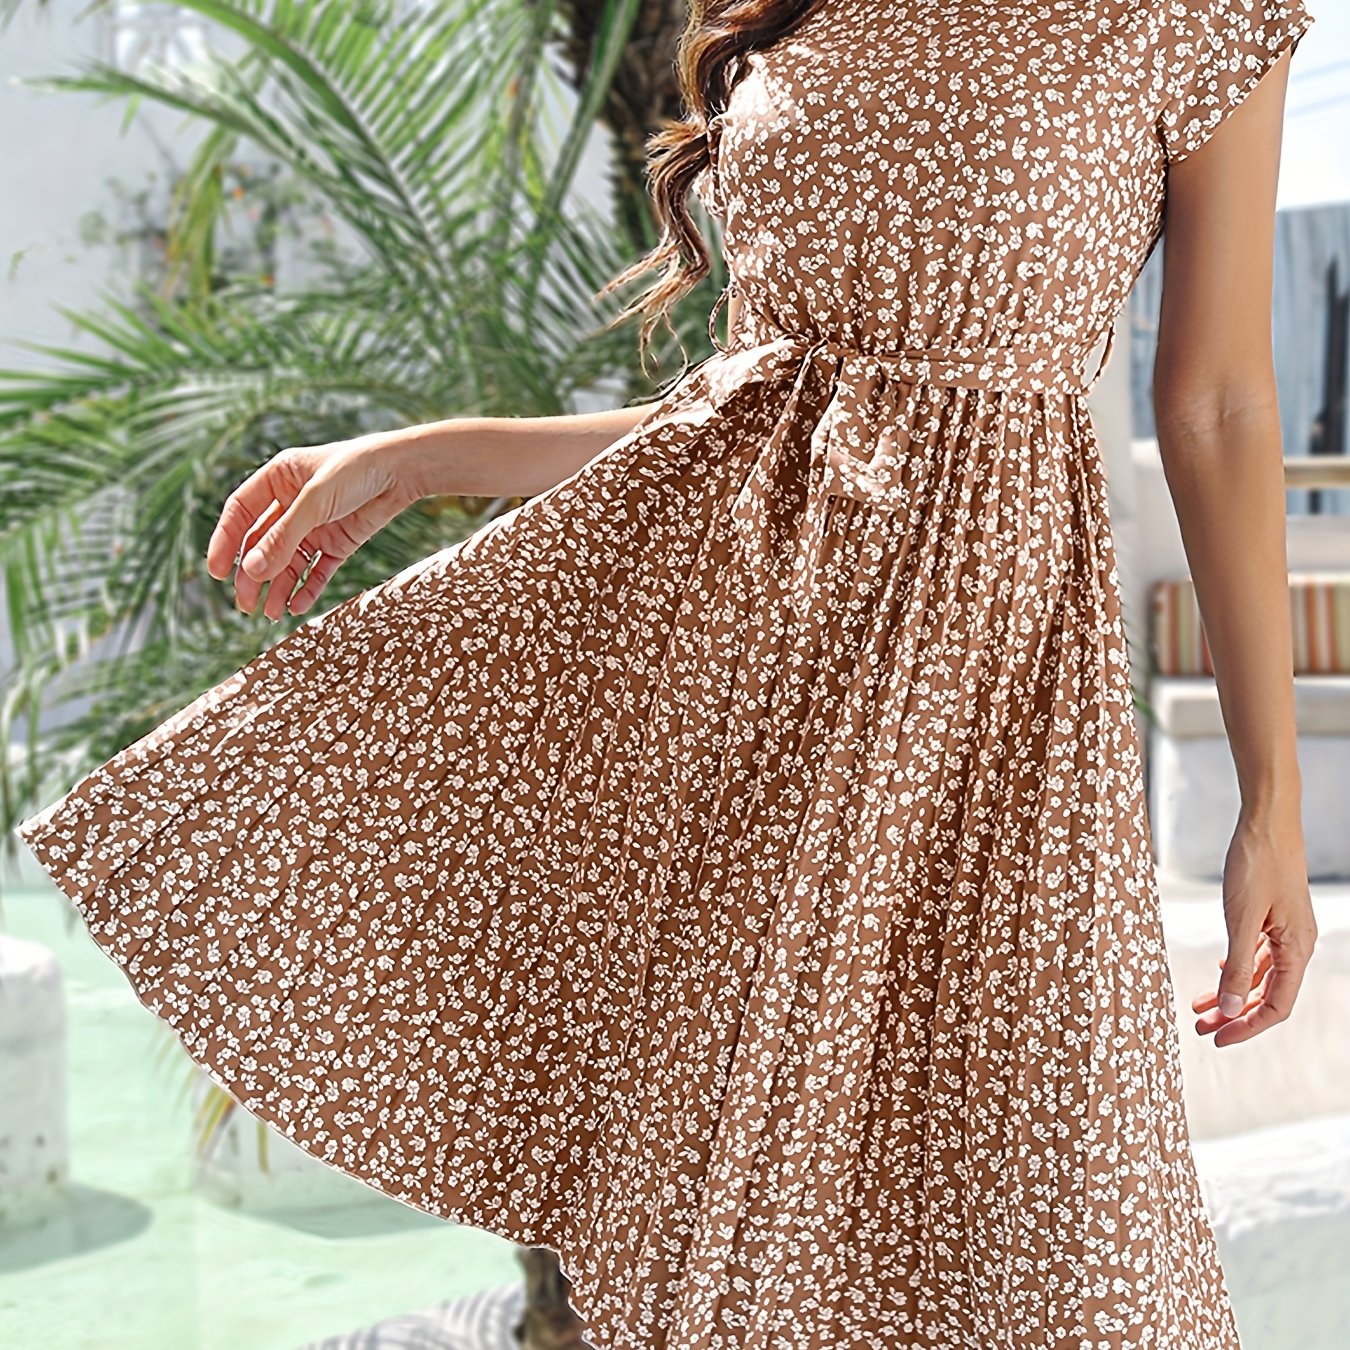 「lovevop」Ditsy Floral Print Belted Dress, Short Sleeve Casual Every Day Vacation Dress For Spring & Summer, Women's Clothing